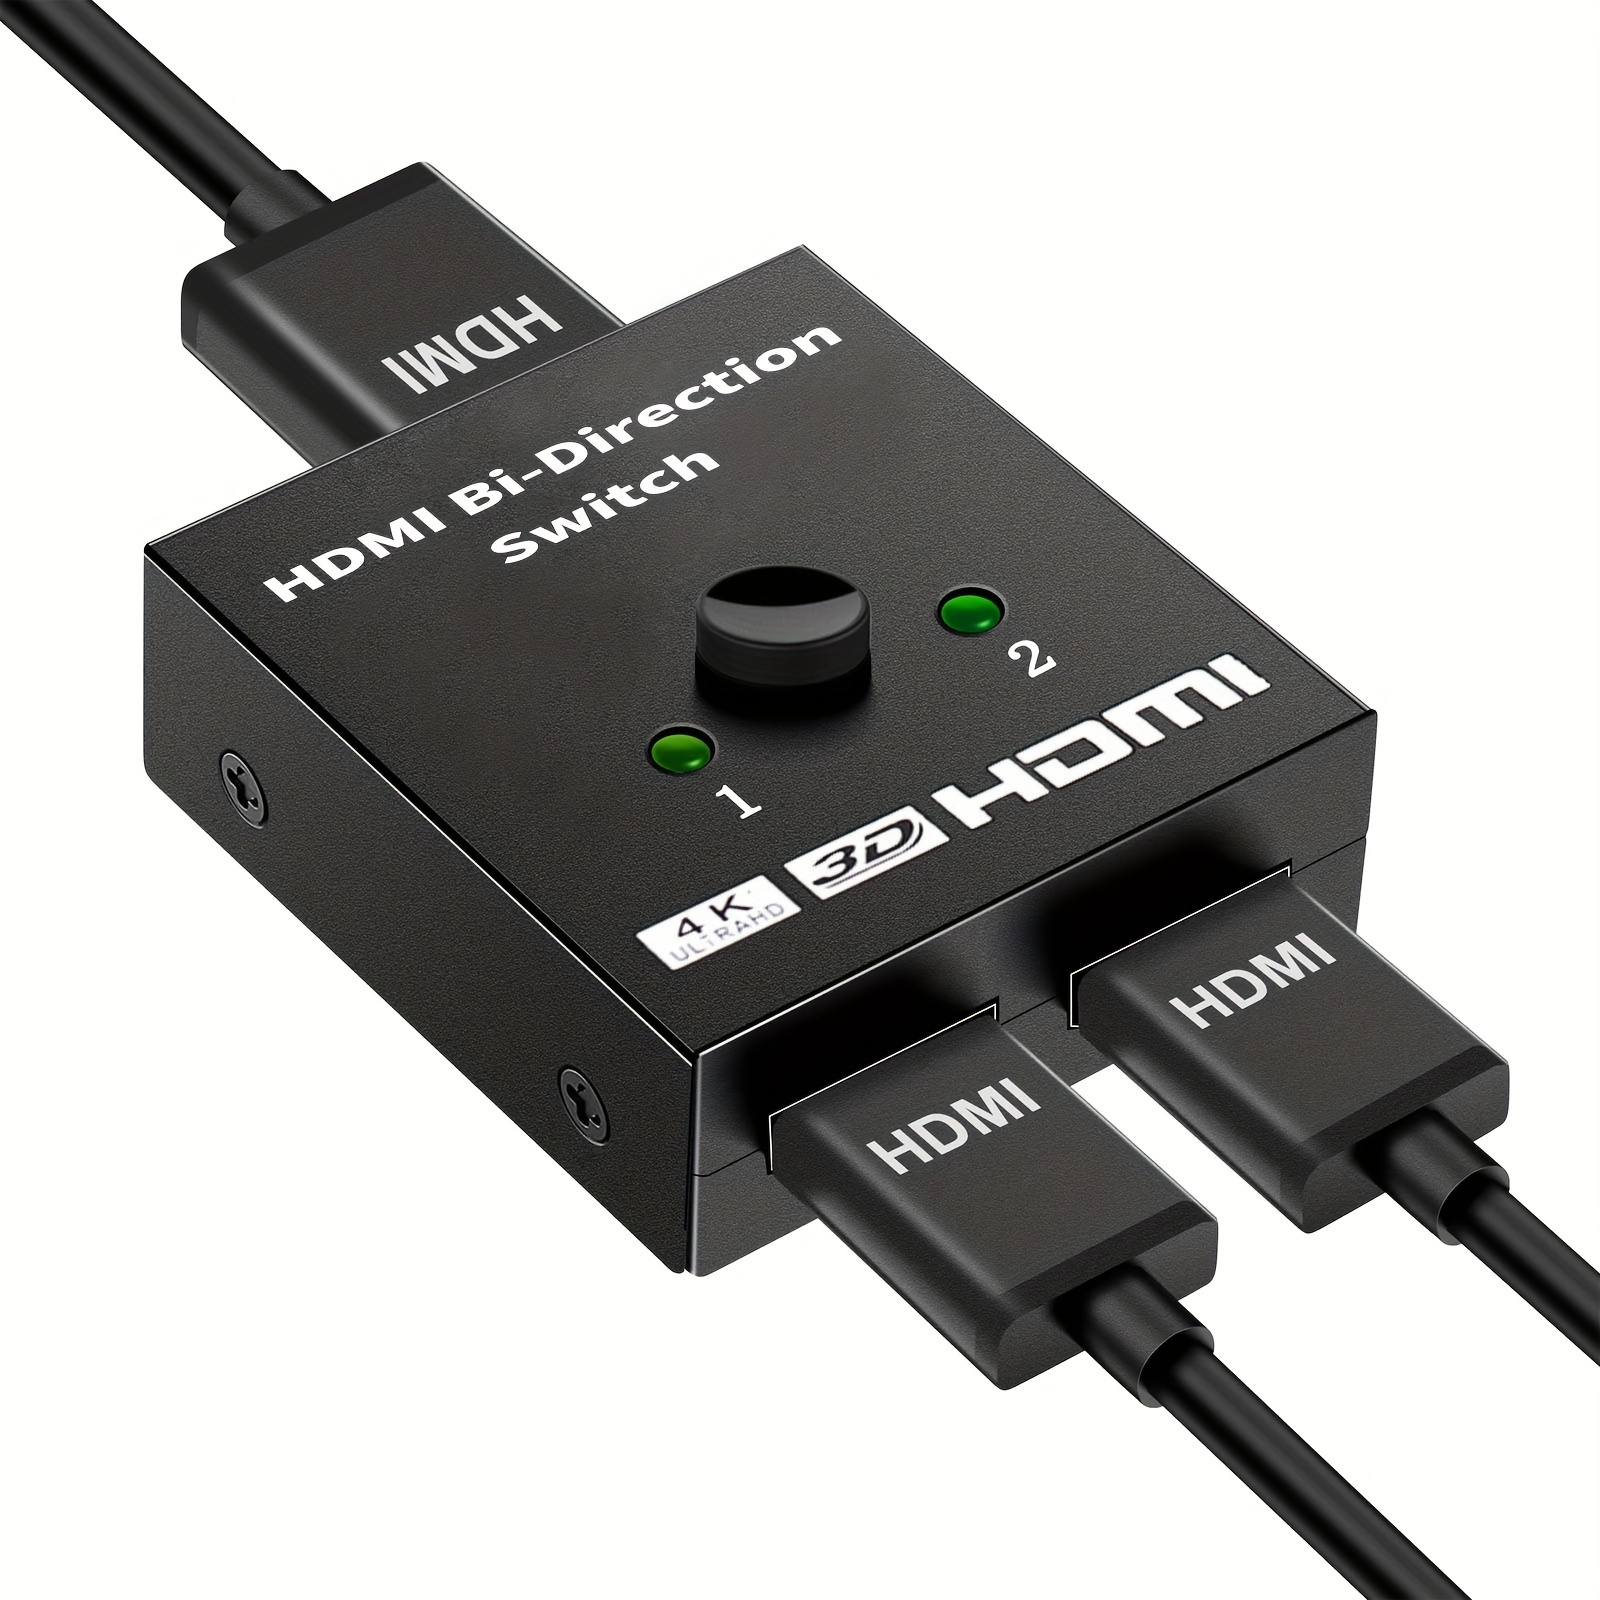 4K HDMI 1-4 Splitter with HDR